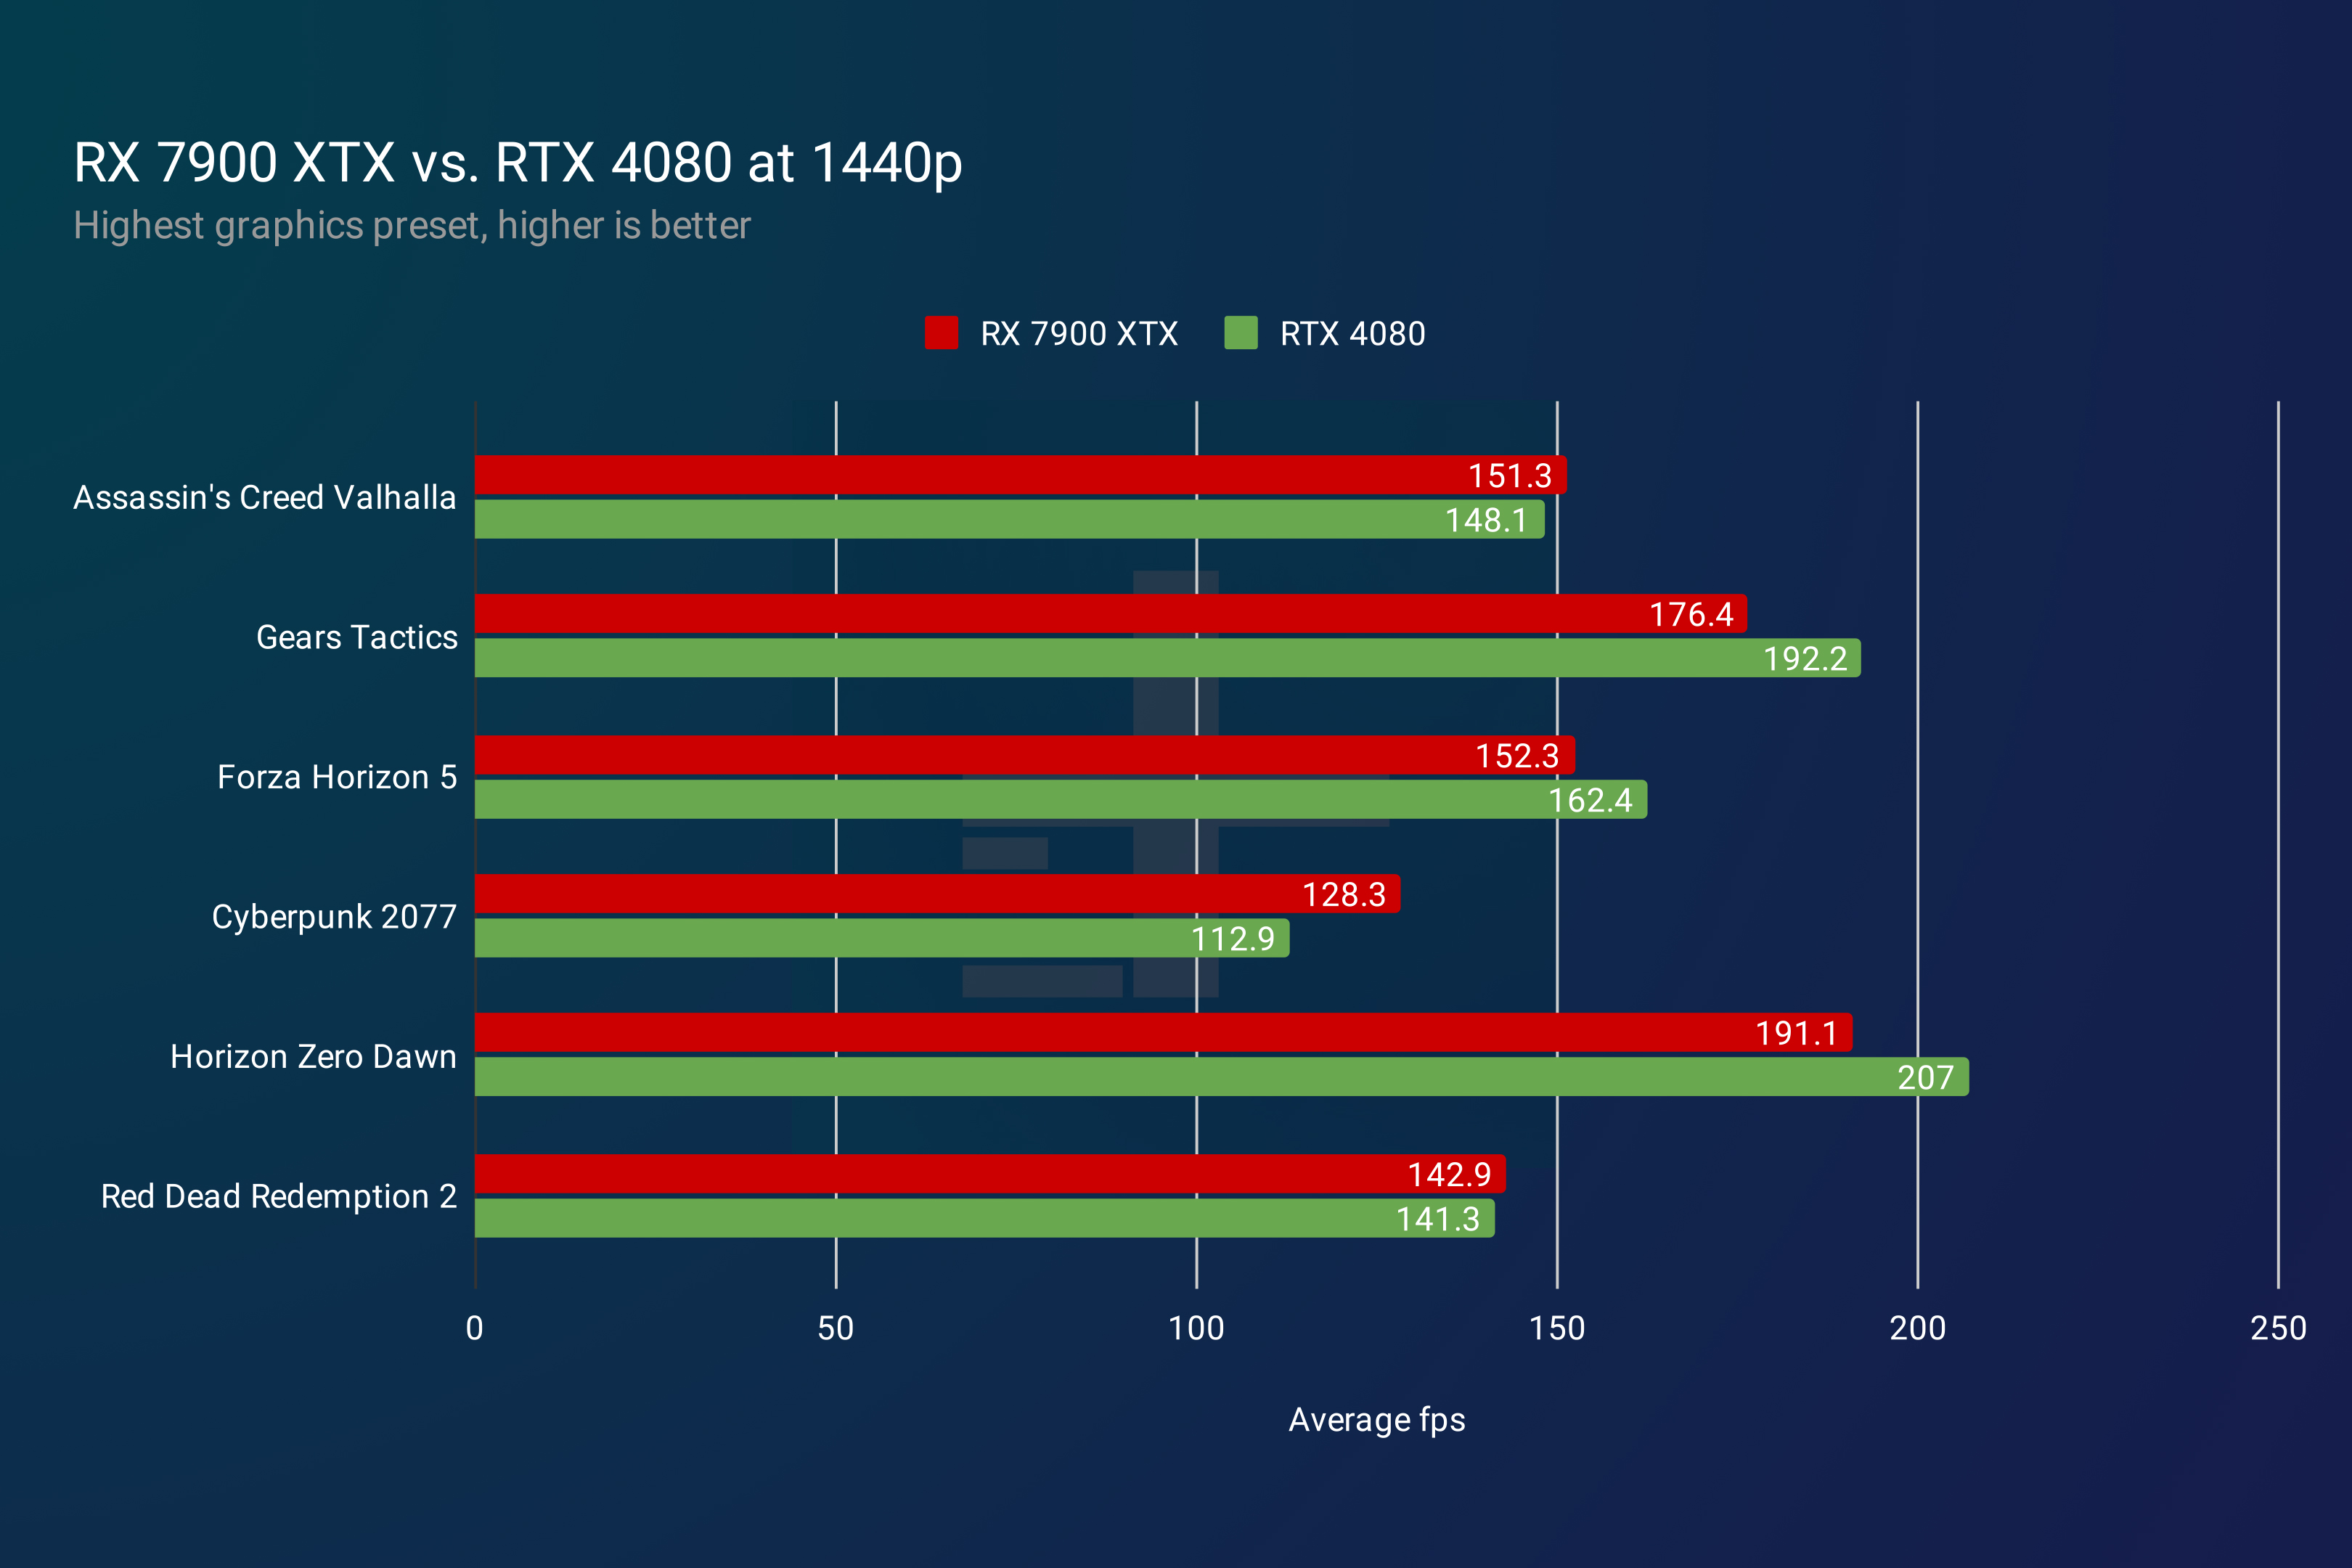 RX 7900 XTX and RTX 4080 performance at 1440p.